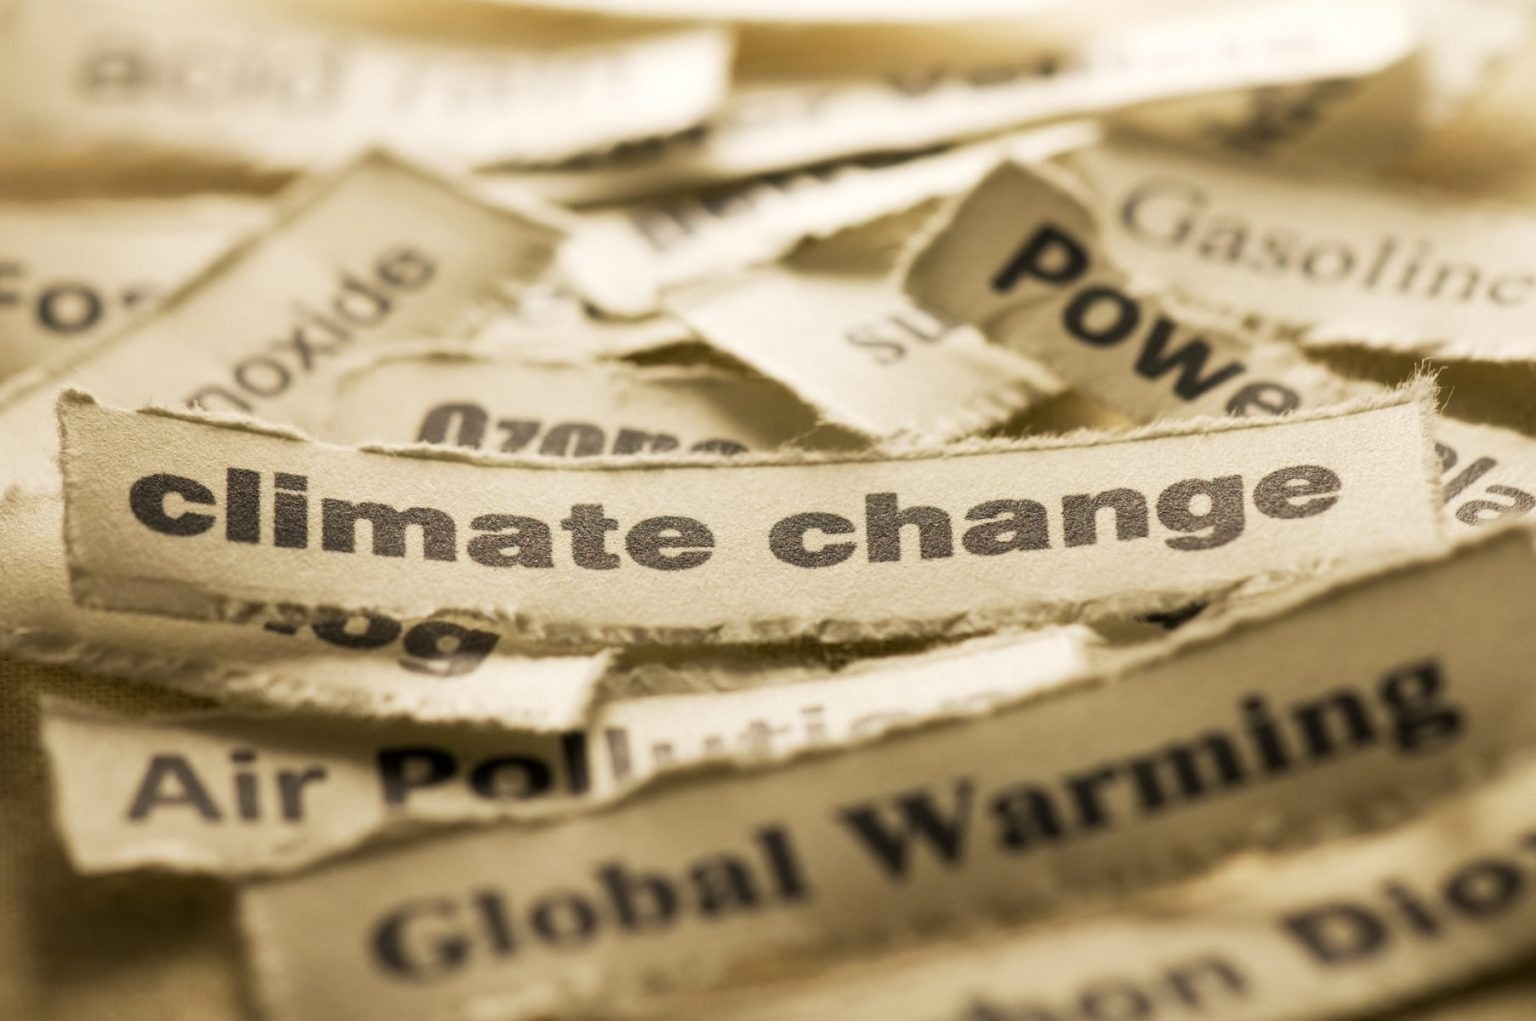 Minimal Impact of Media Coverage on Climate Change Research